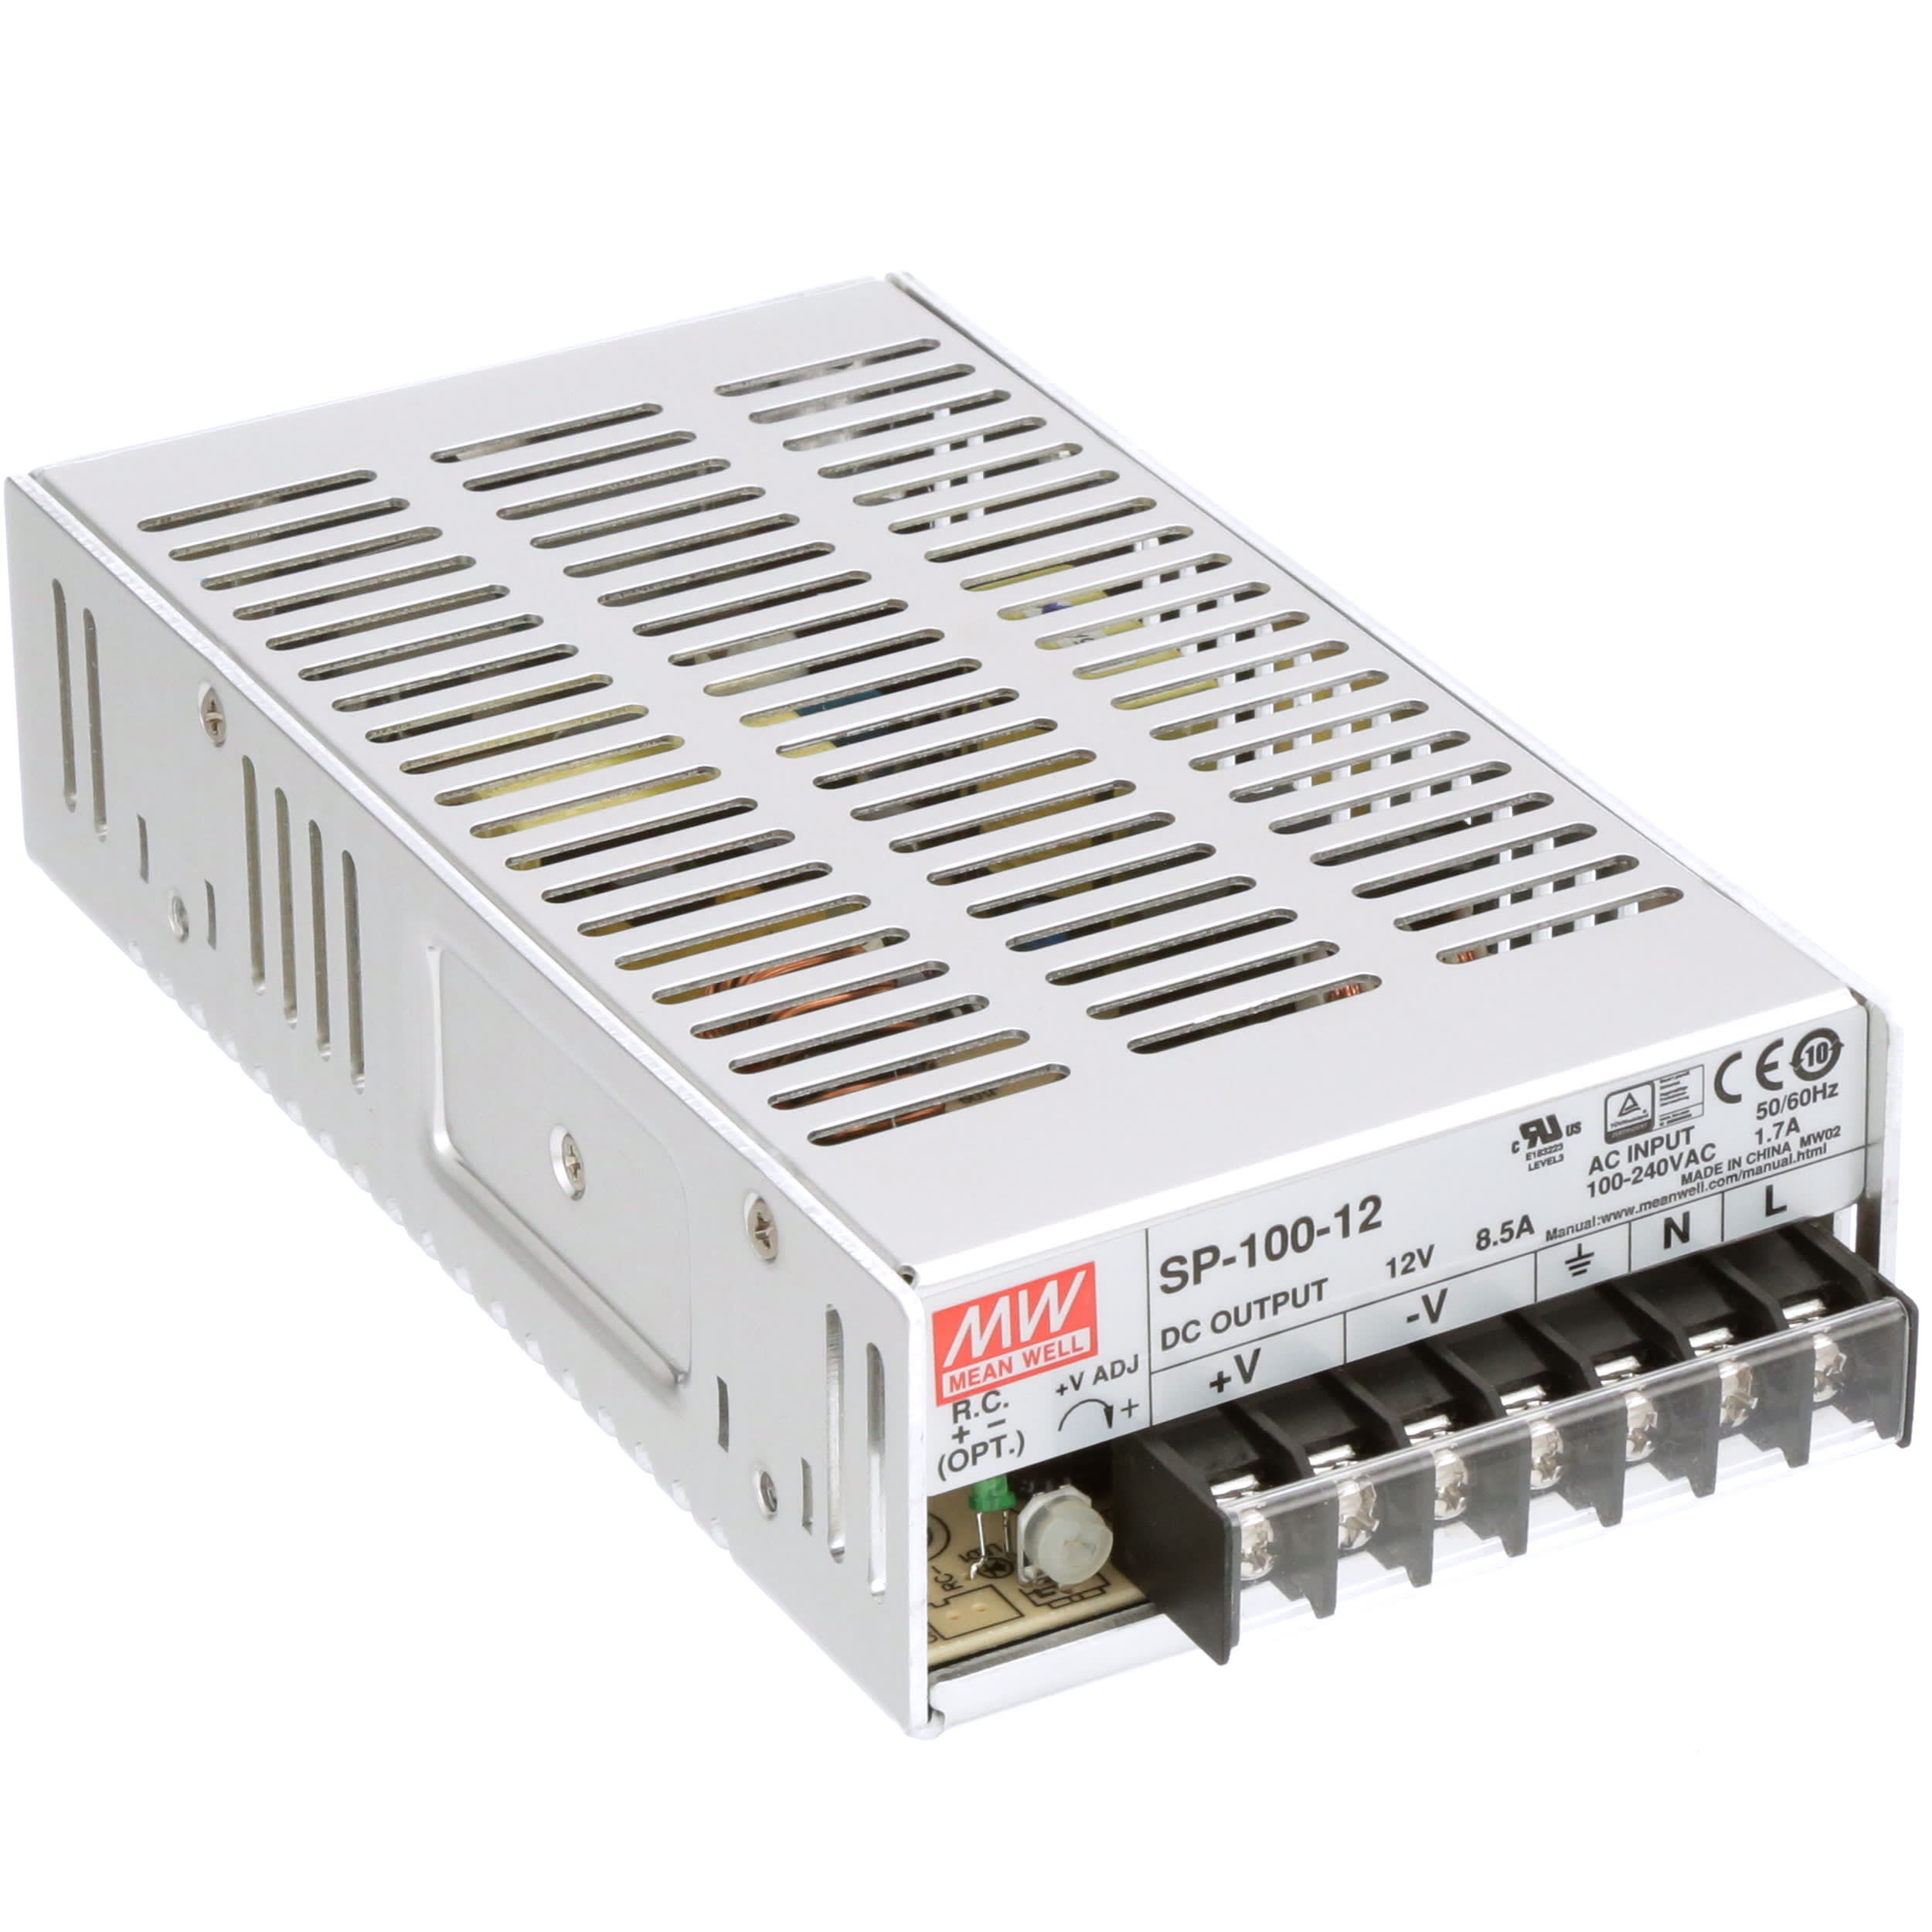 Mean Well Switching power supply( Input 50/60Hz 100-240v ac 6.5A SP-480- 48